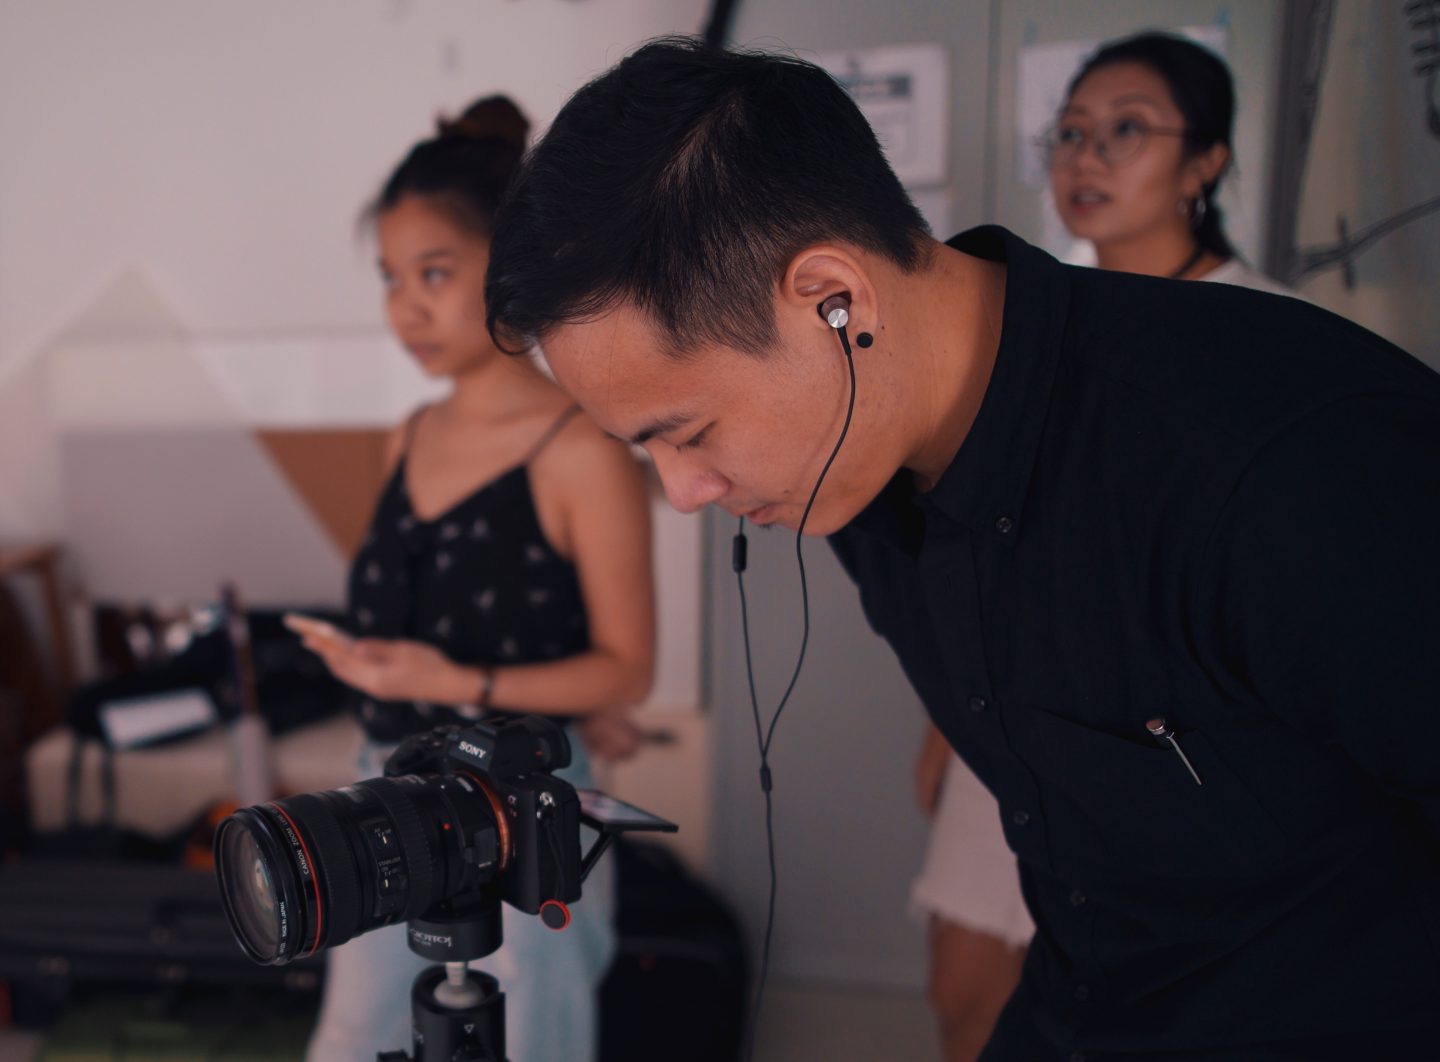 These days, Tan uses his skills in videography to create videos for The Fireplace Collective and other Christian groups.